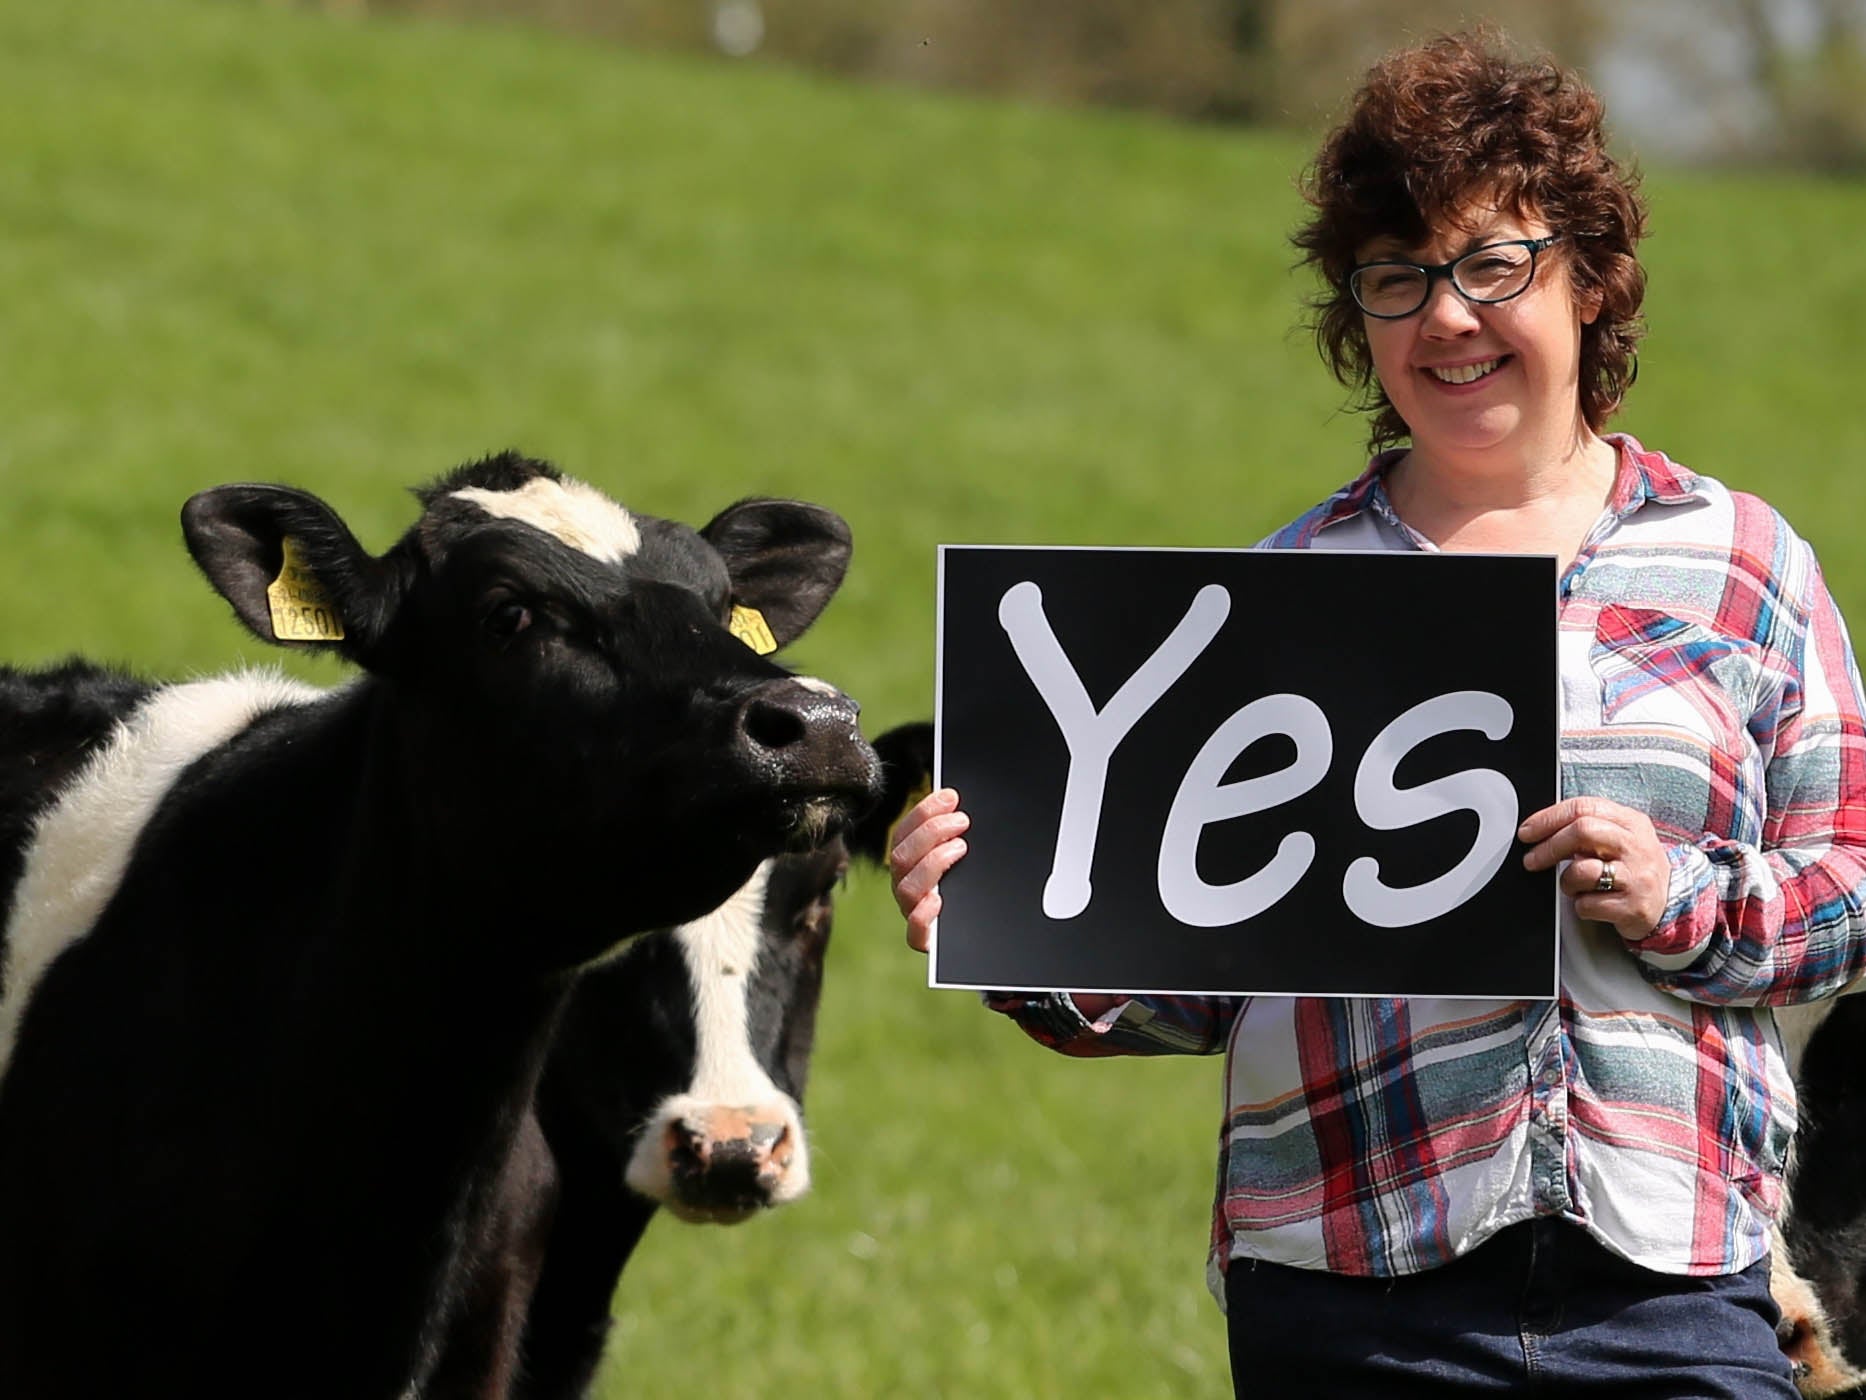 The author Lorna Sixsmith and her dairy cows showing their support for removing Ireland’s eighth amendment